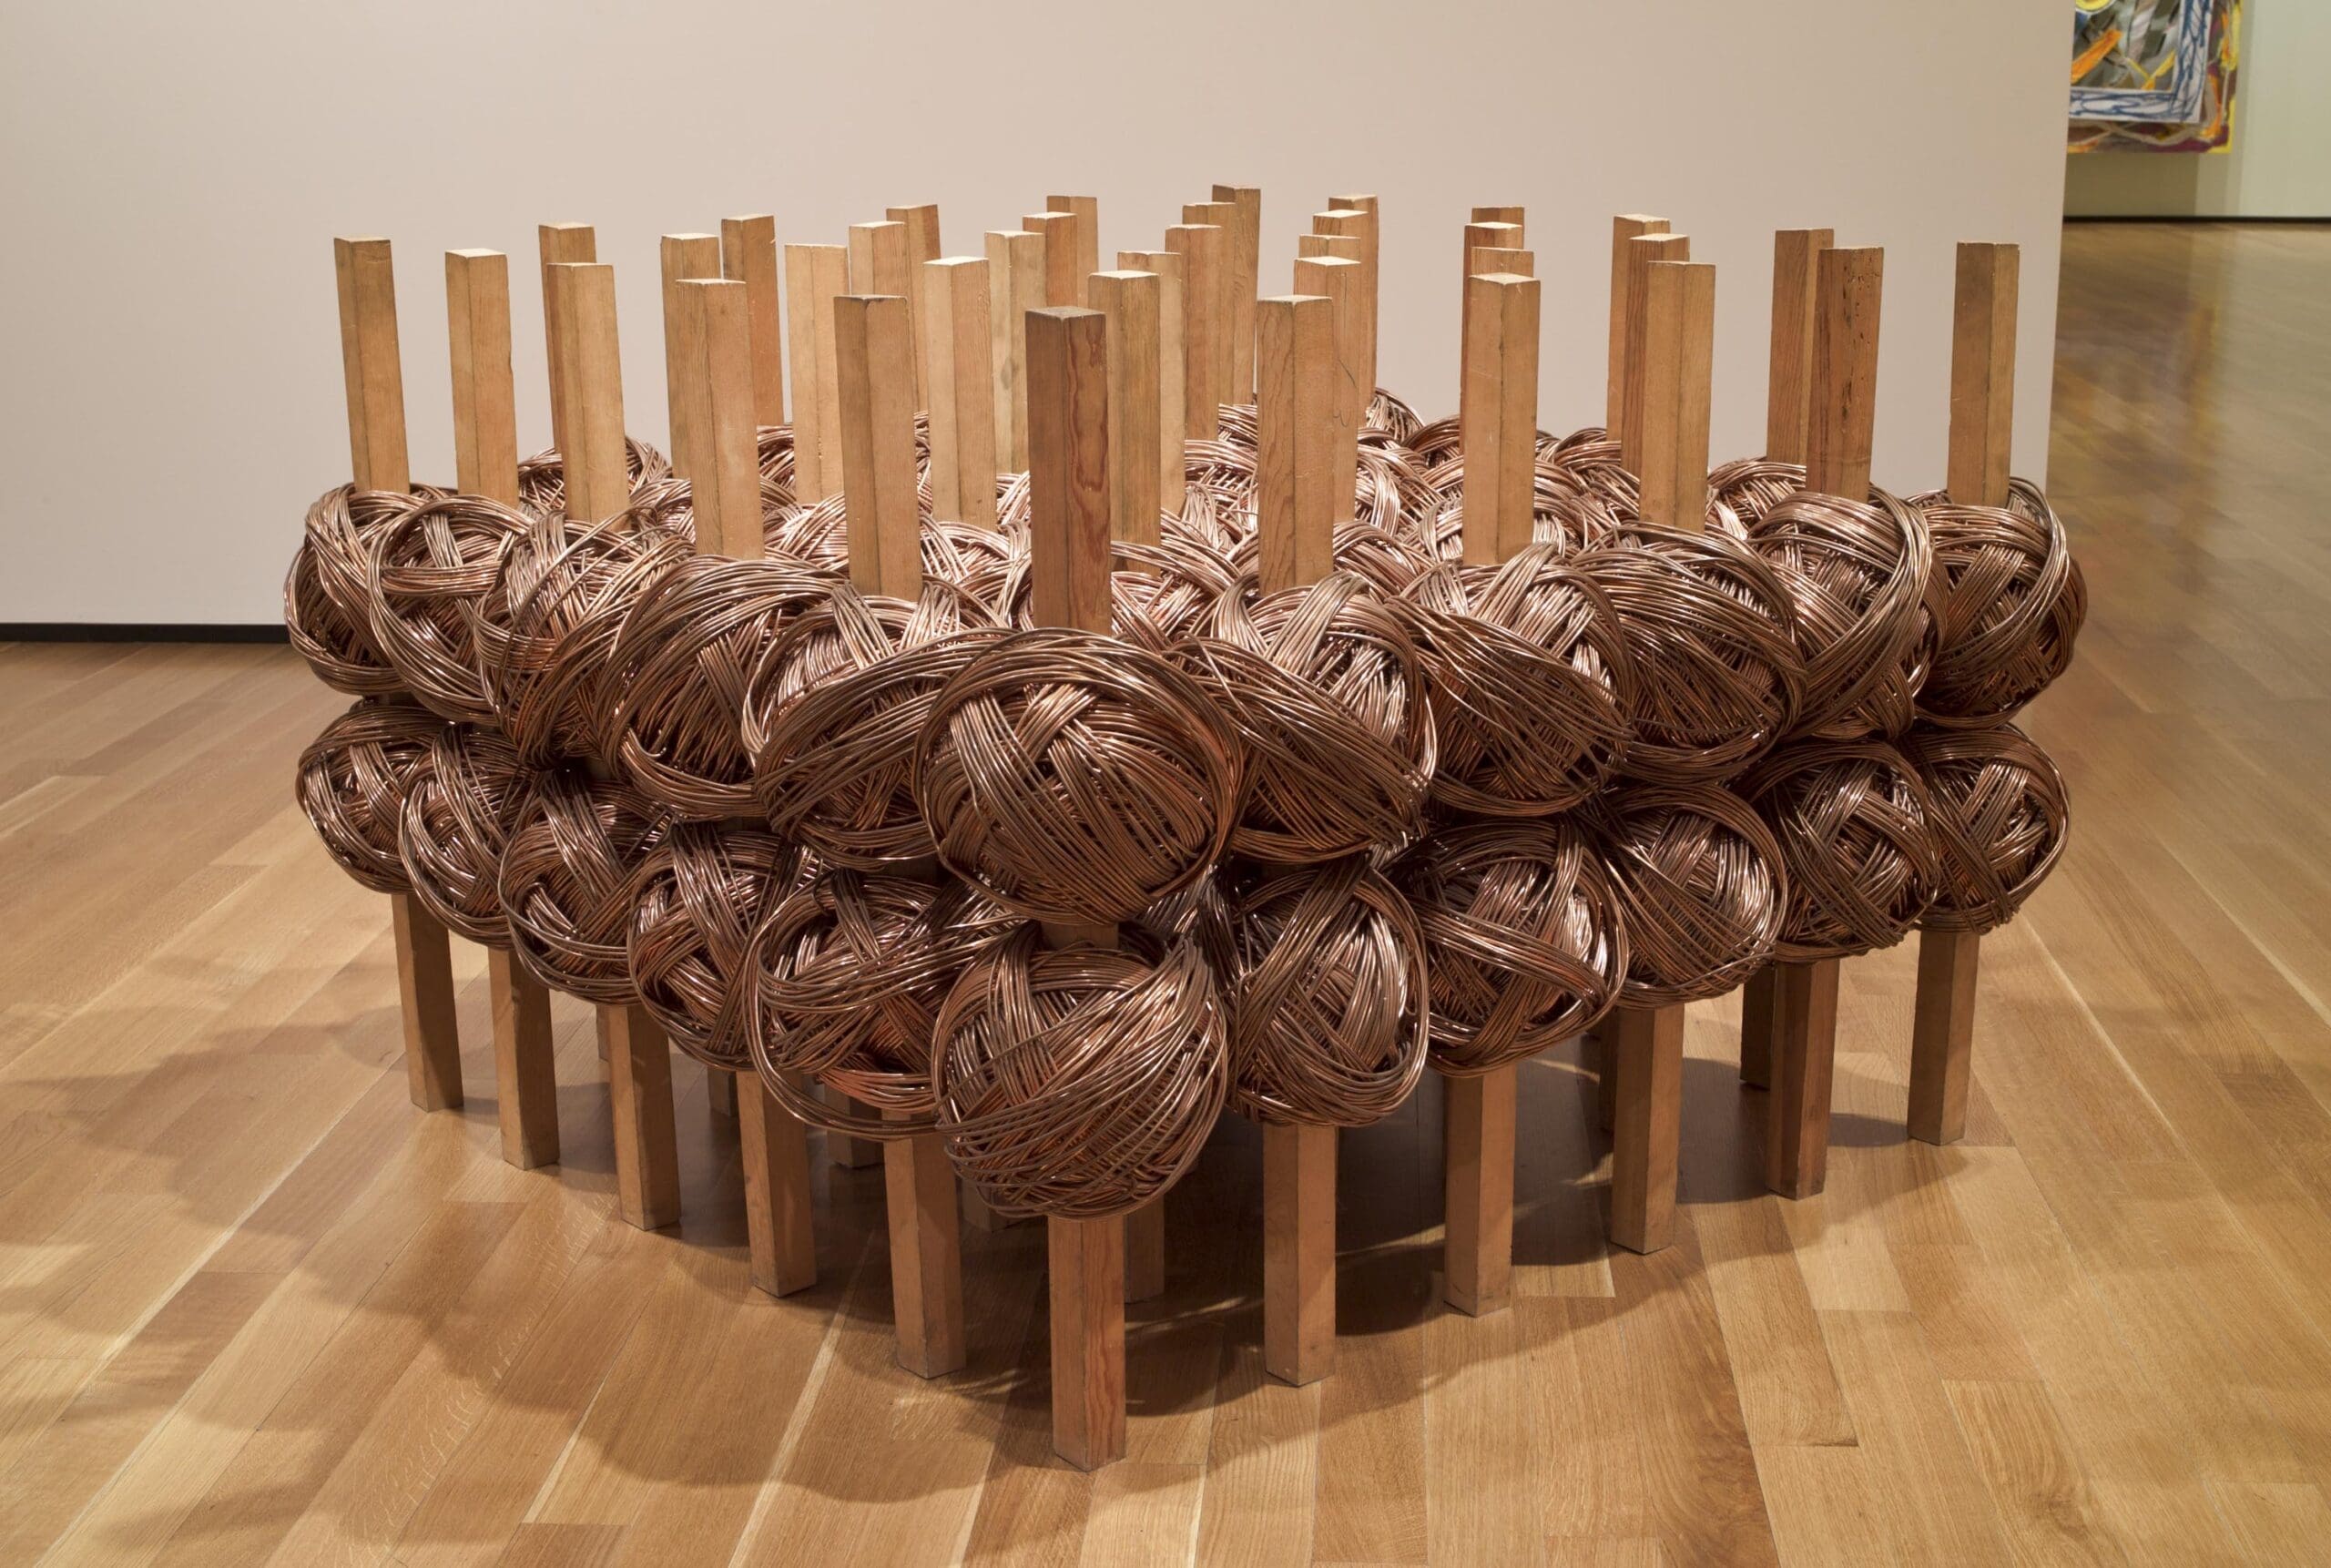 Jackie Winsor, #2 Copper, 1976, Wood and copper, 34 1/2 x 51 x 51 in. Collection of the Akron Art Museum, Purchased, by exchange, with funds from Mr. and Mrs. Raymond C. Firestone